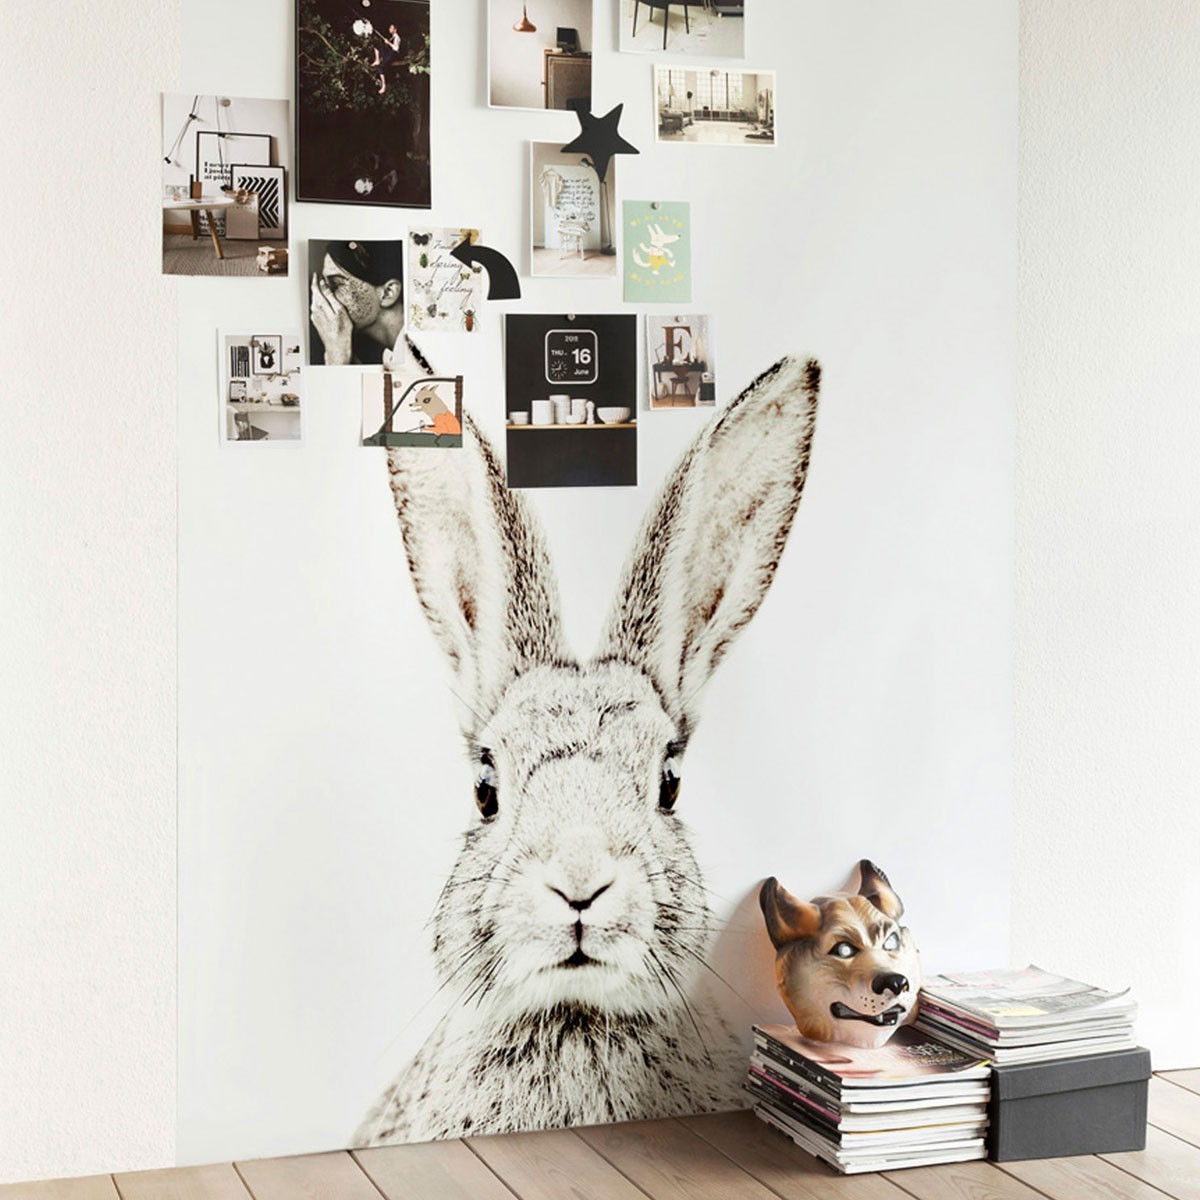 Magnetic wallpaper Rabbit / Groovy Magnets